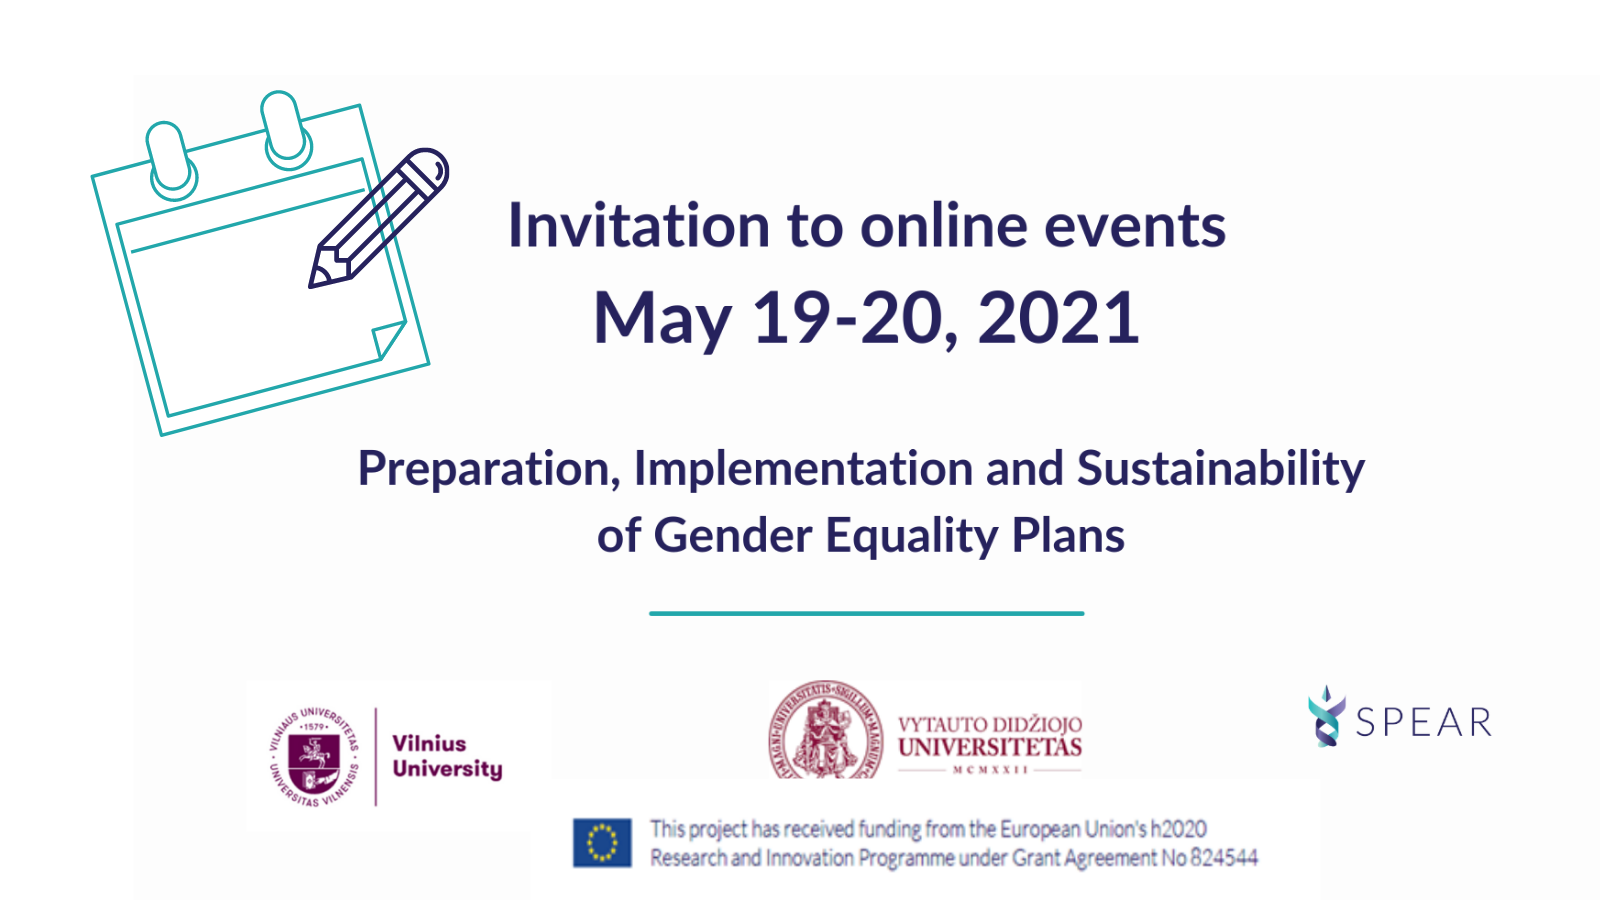 Preparation, Implementation and Sustainability of Gender Equality Plans 